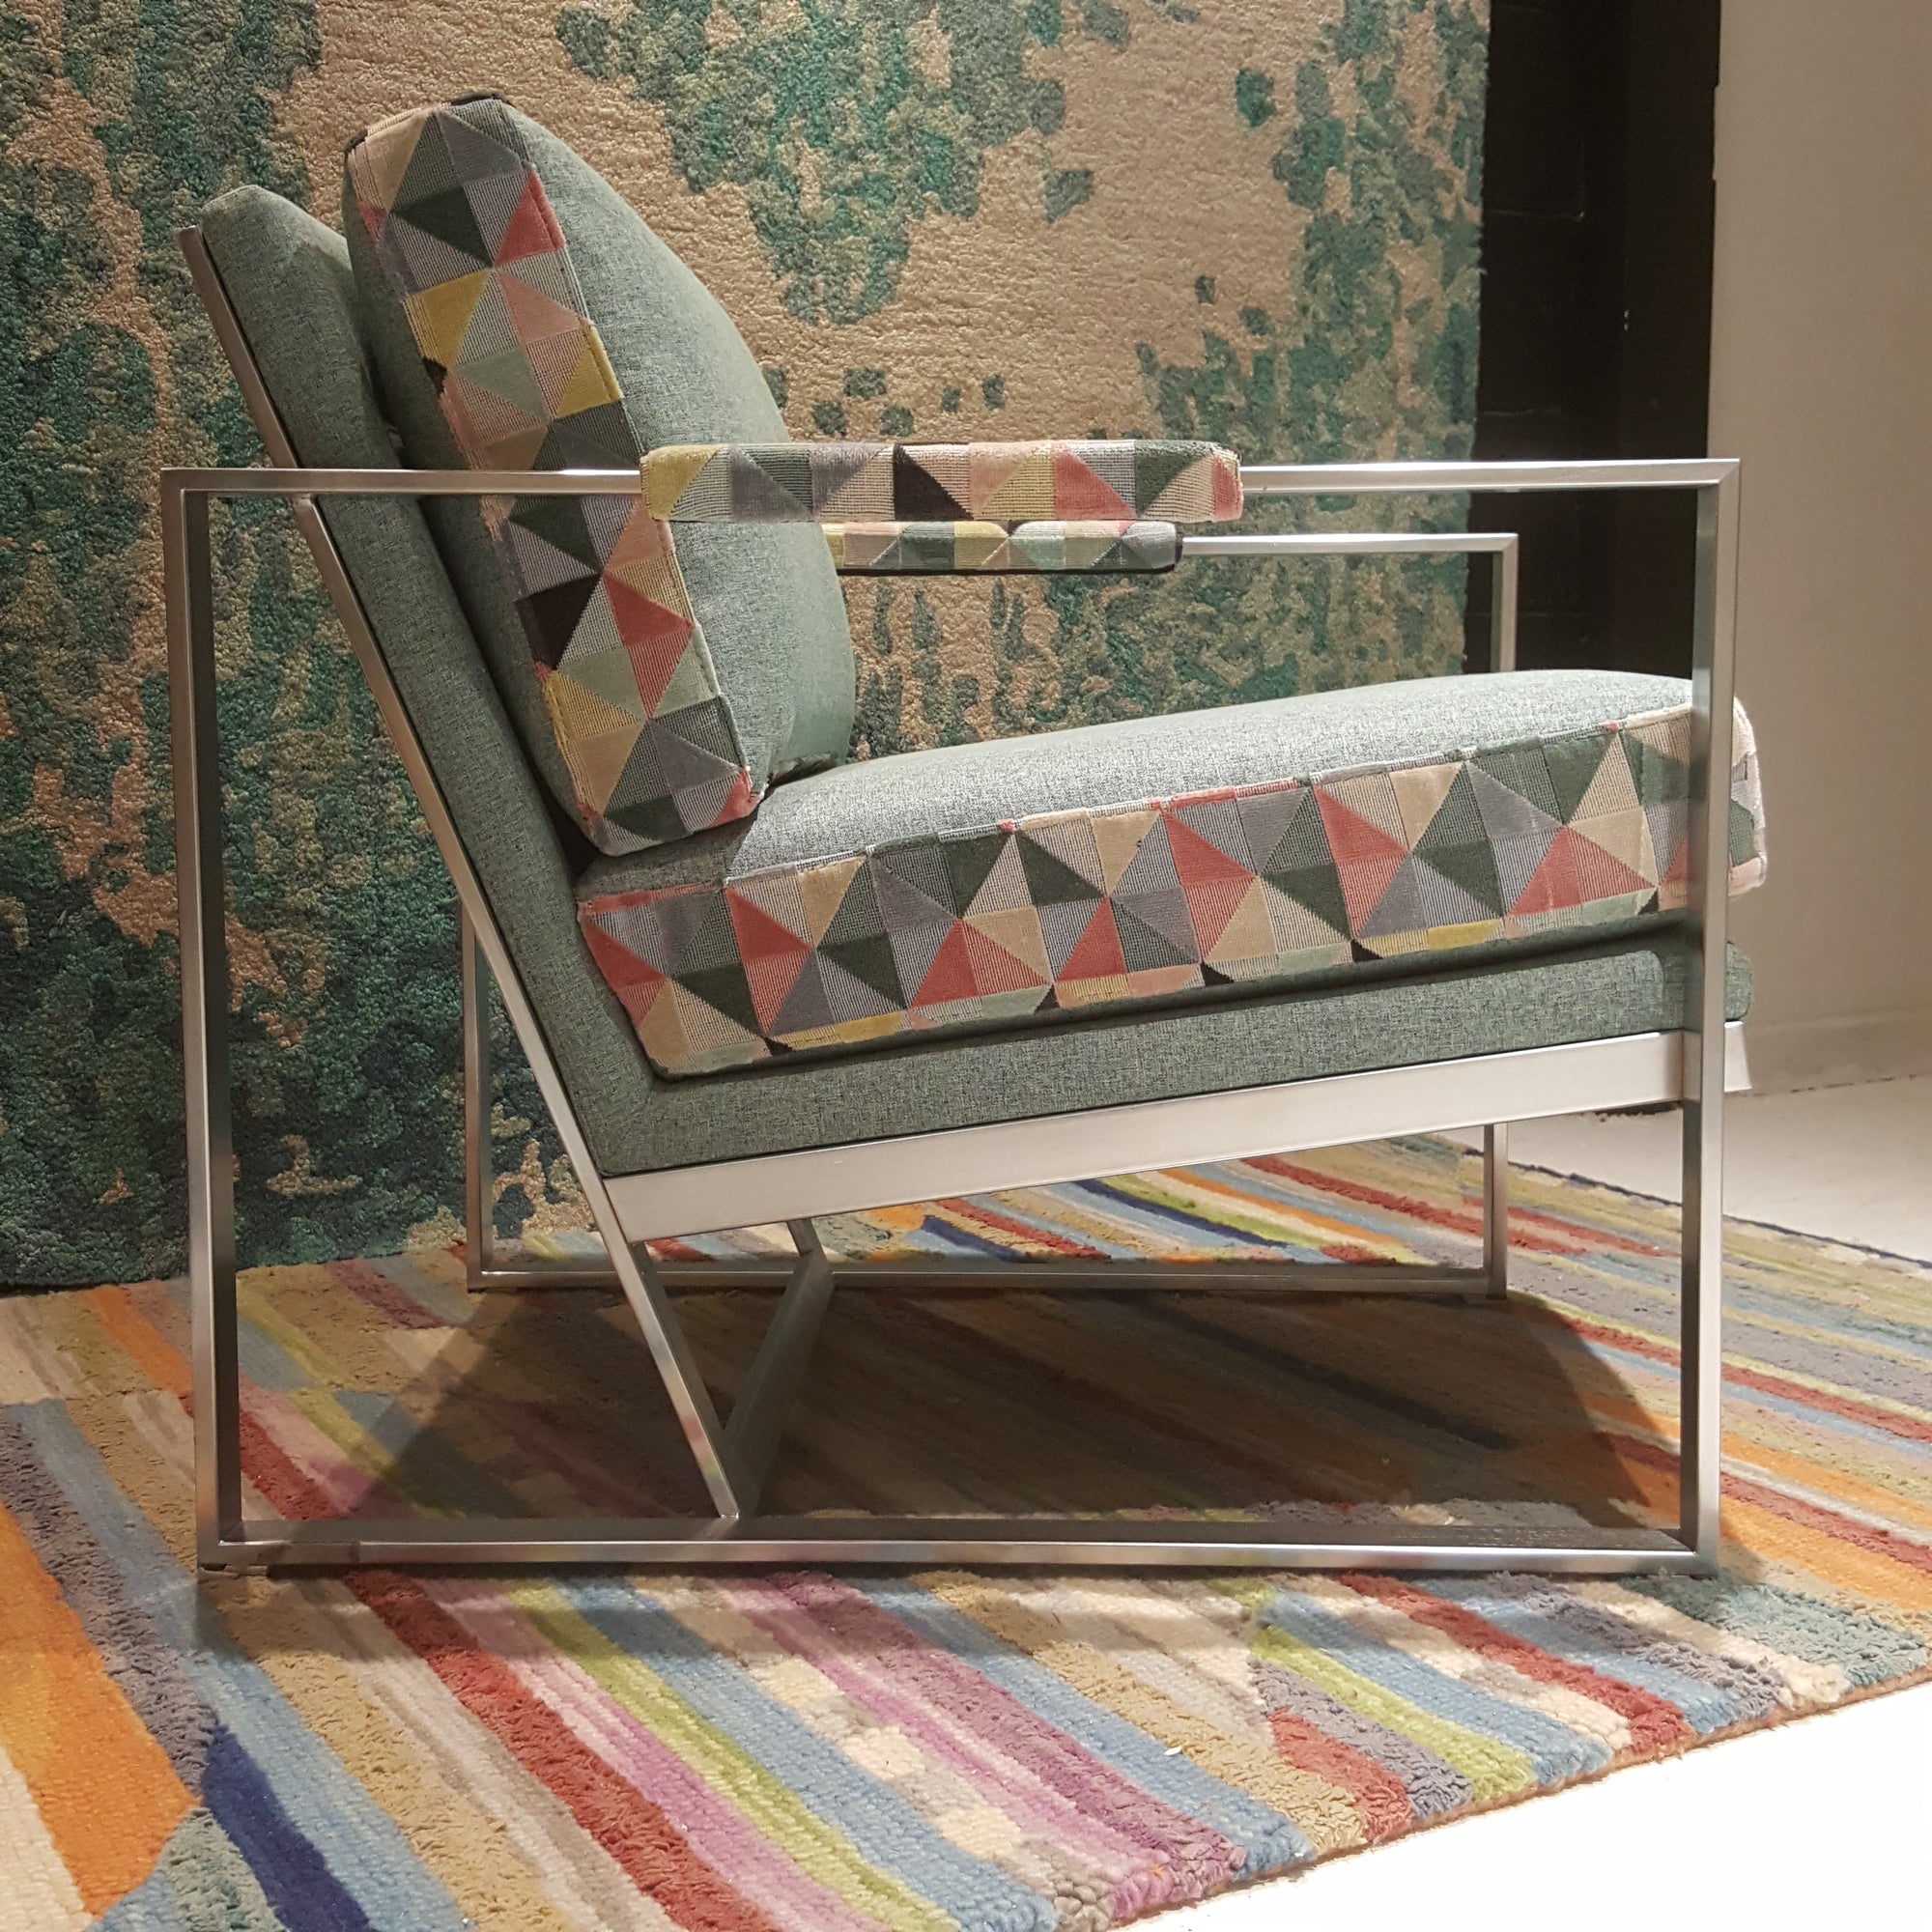 George Armchair - SOLD